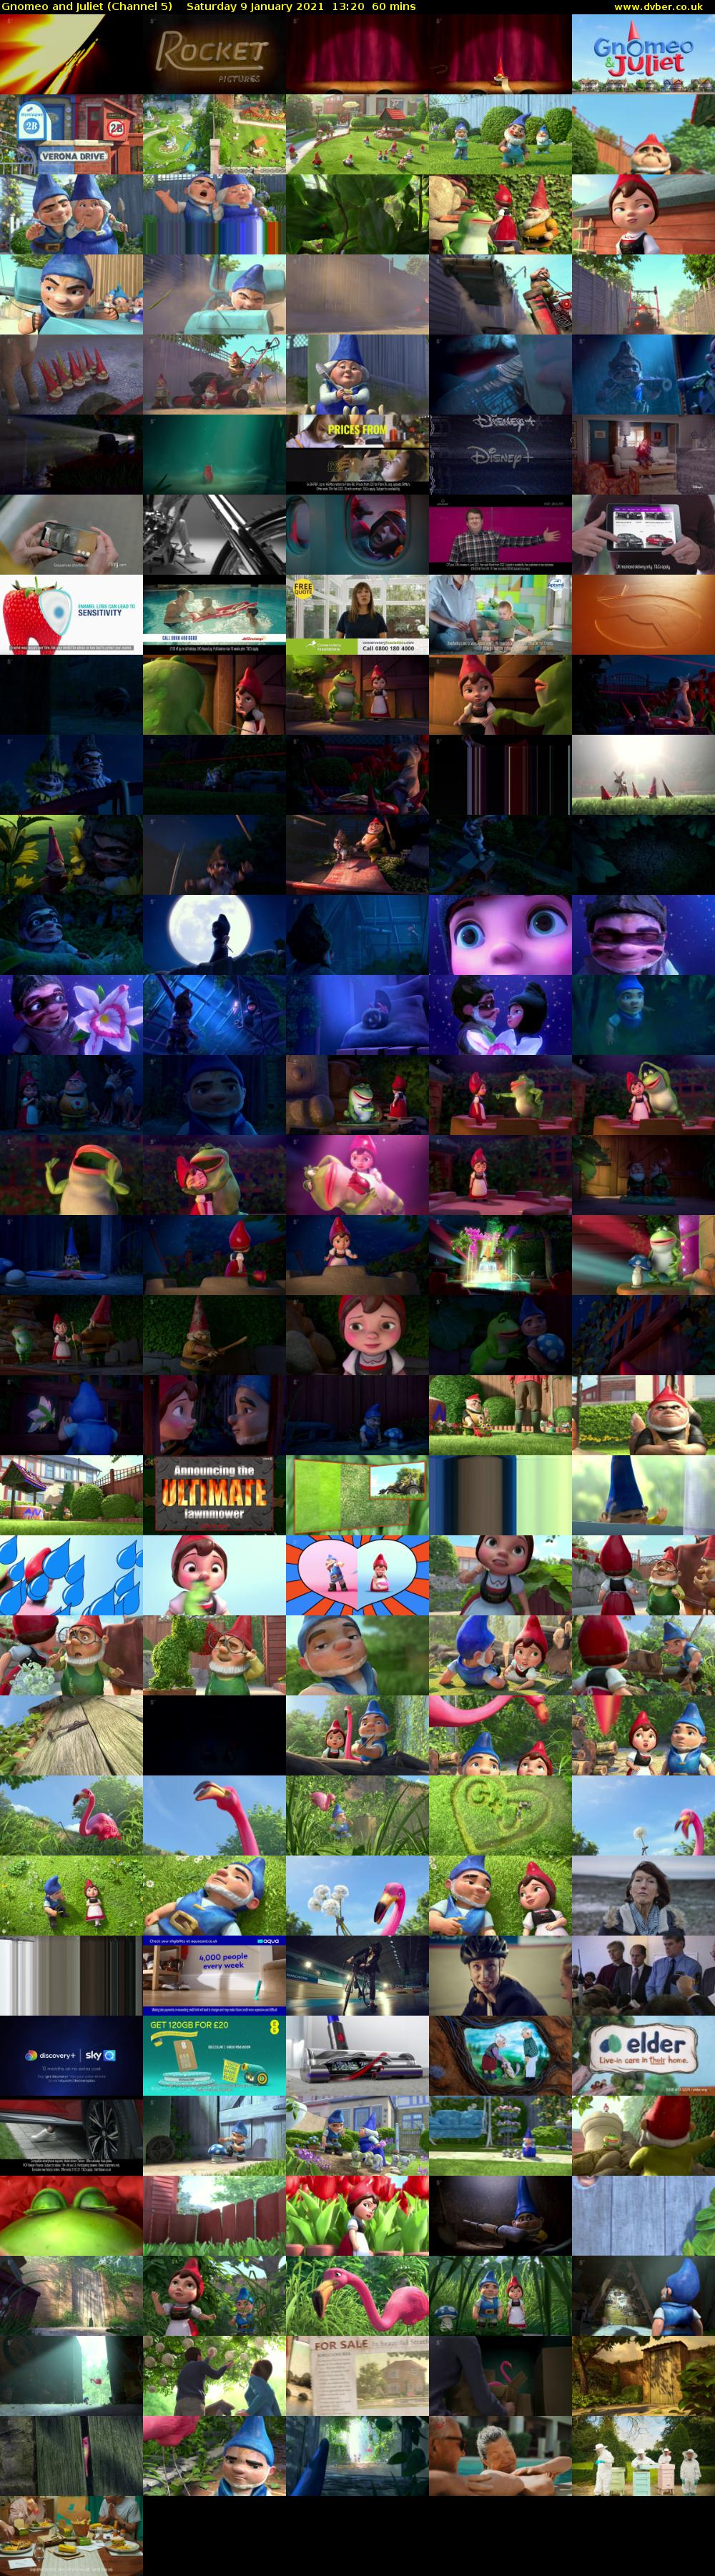 Gnomeo and Juliet (Channel 5) Saturday 9 January 2021 13:20 - 14:20